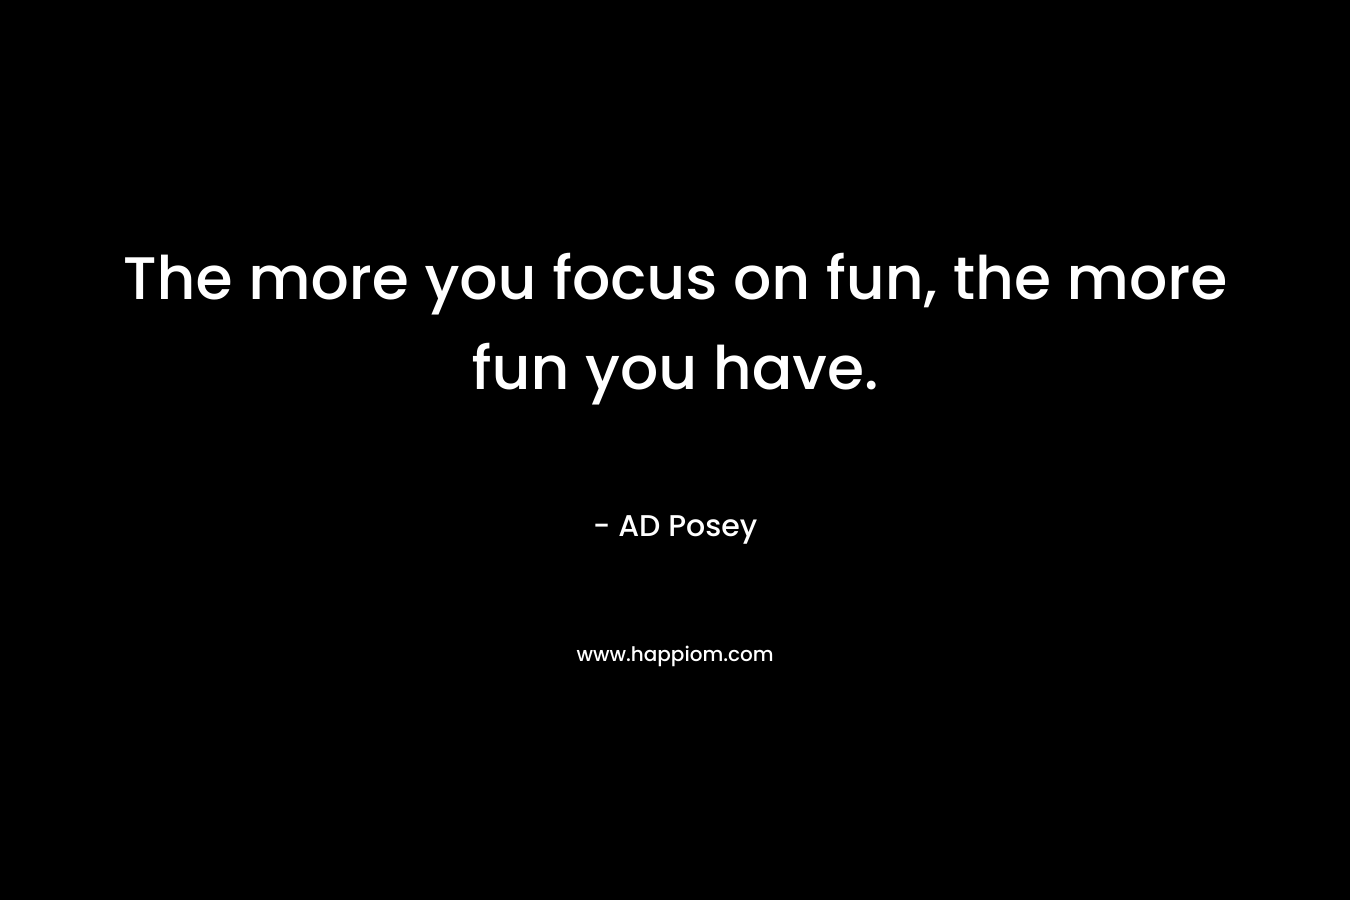 The more you focus on fun, the more fun you have.